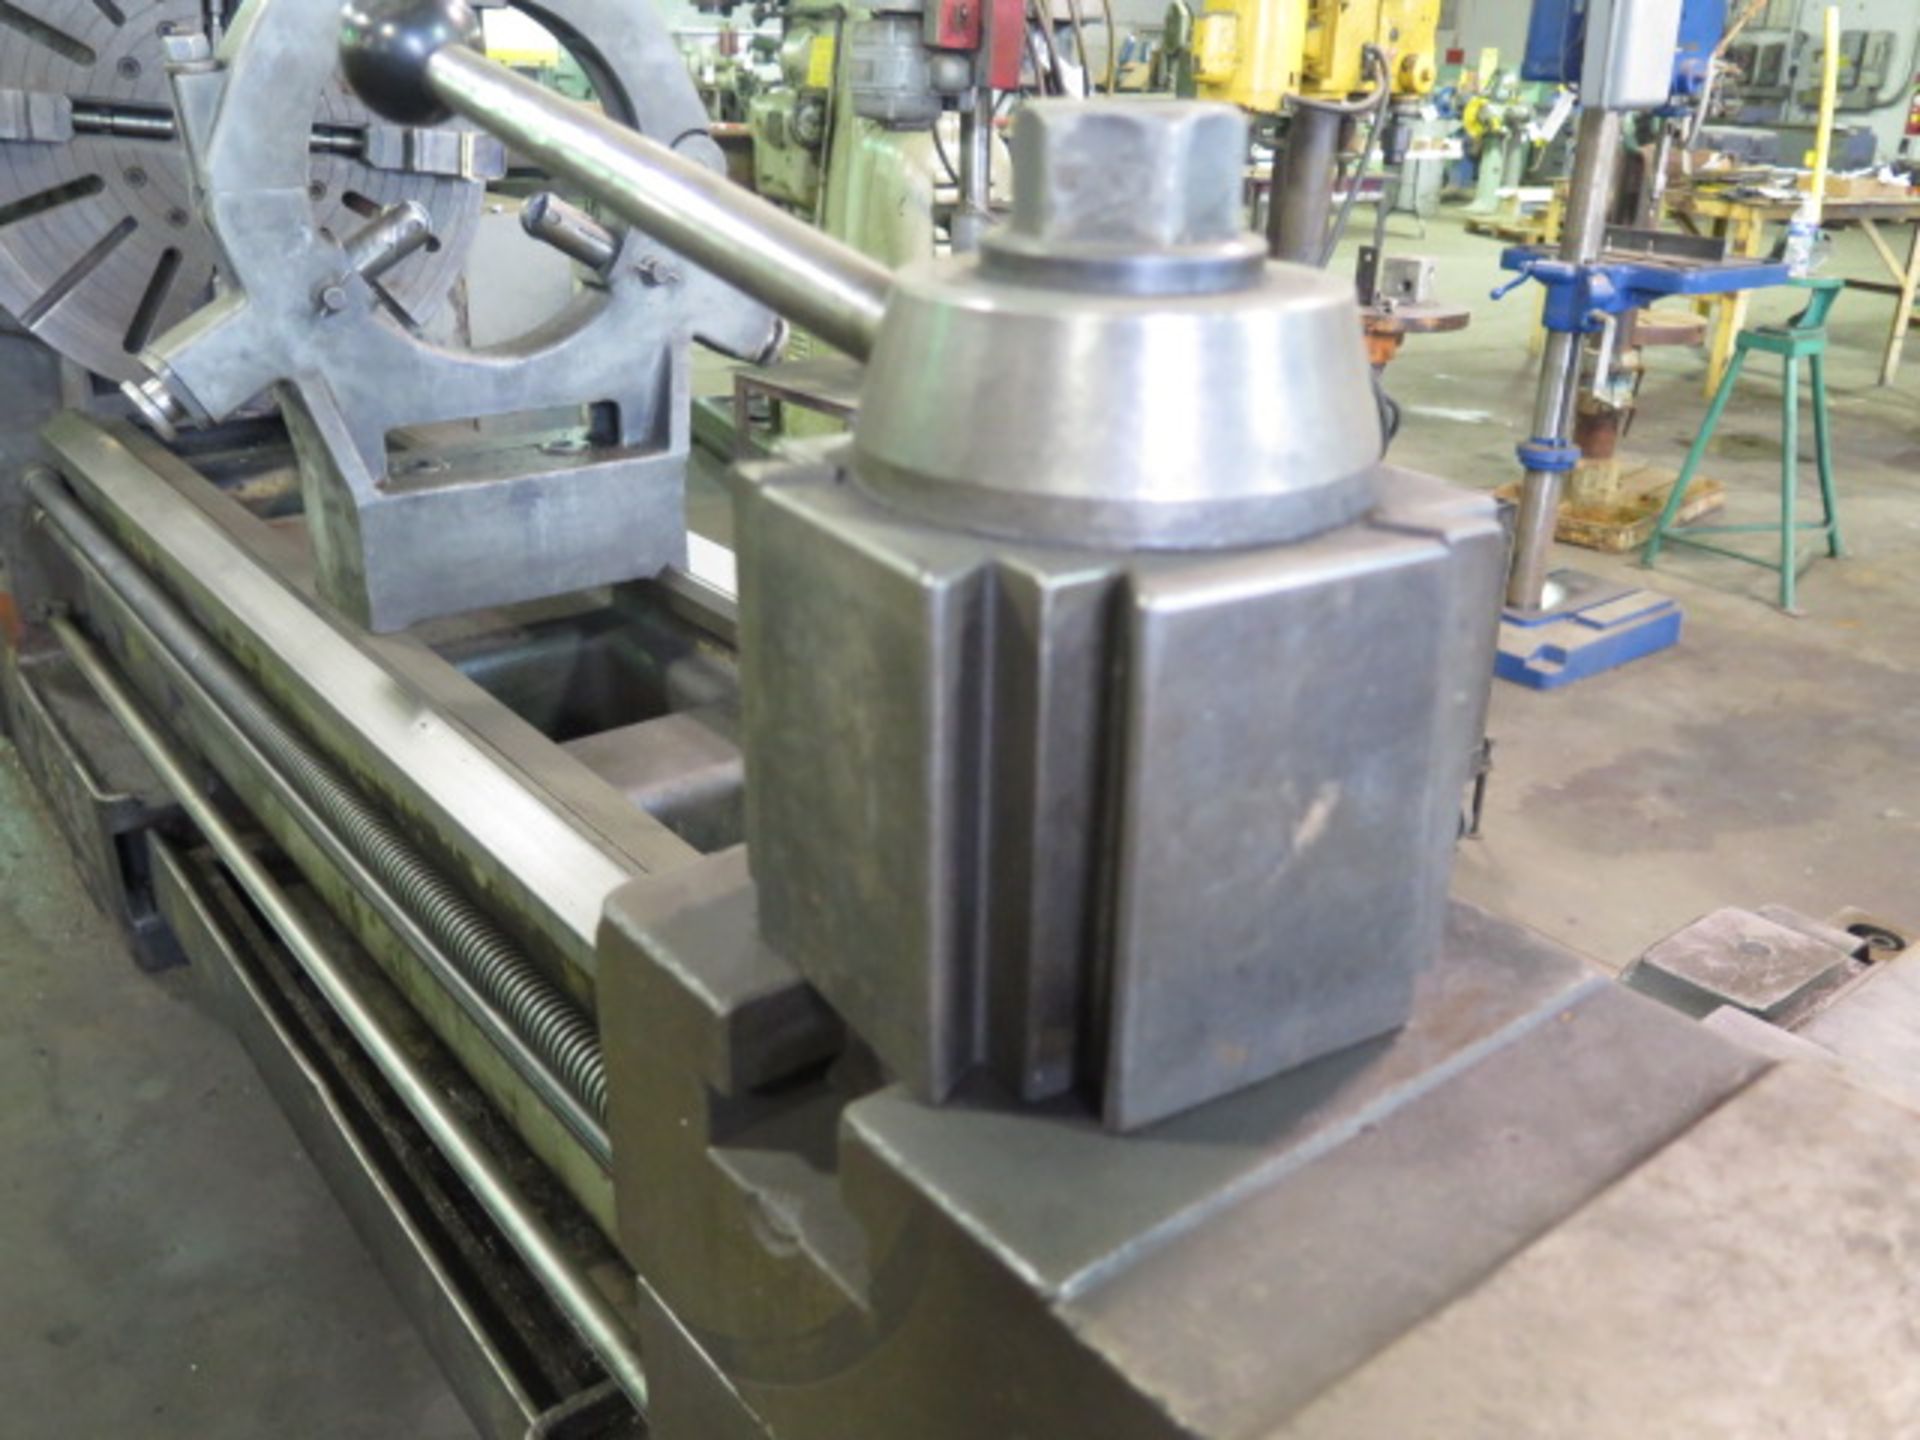 PBR TM-500 Big Bore Gap Lathe w/90-800 RPM, 5 7/8” Spindle Bore, Taper Attach, Inch/mm, SOLD AS IS - Image 12 of 21